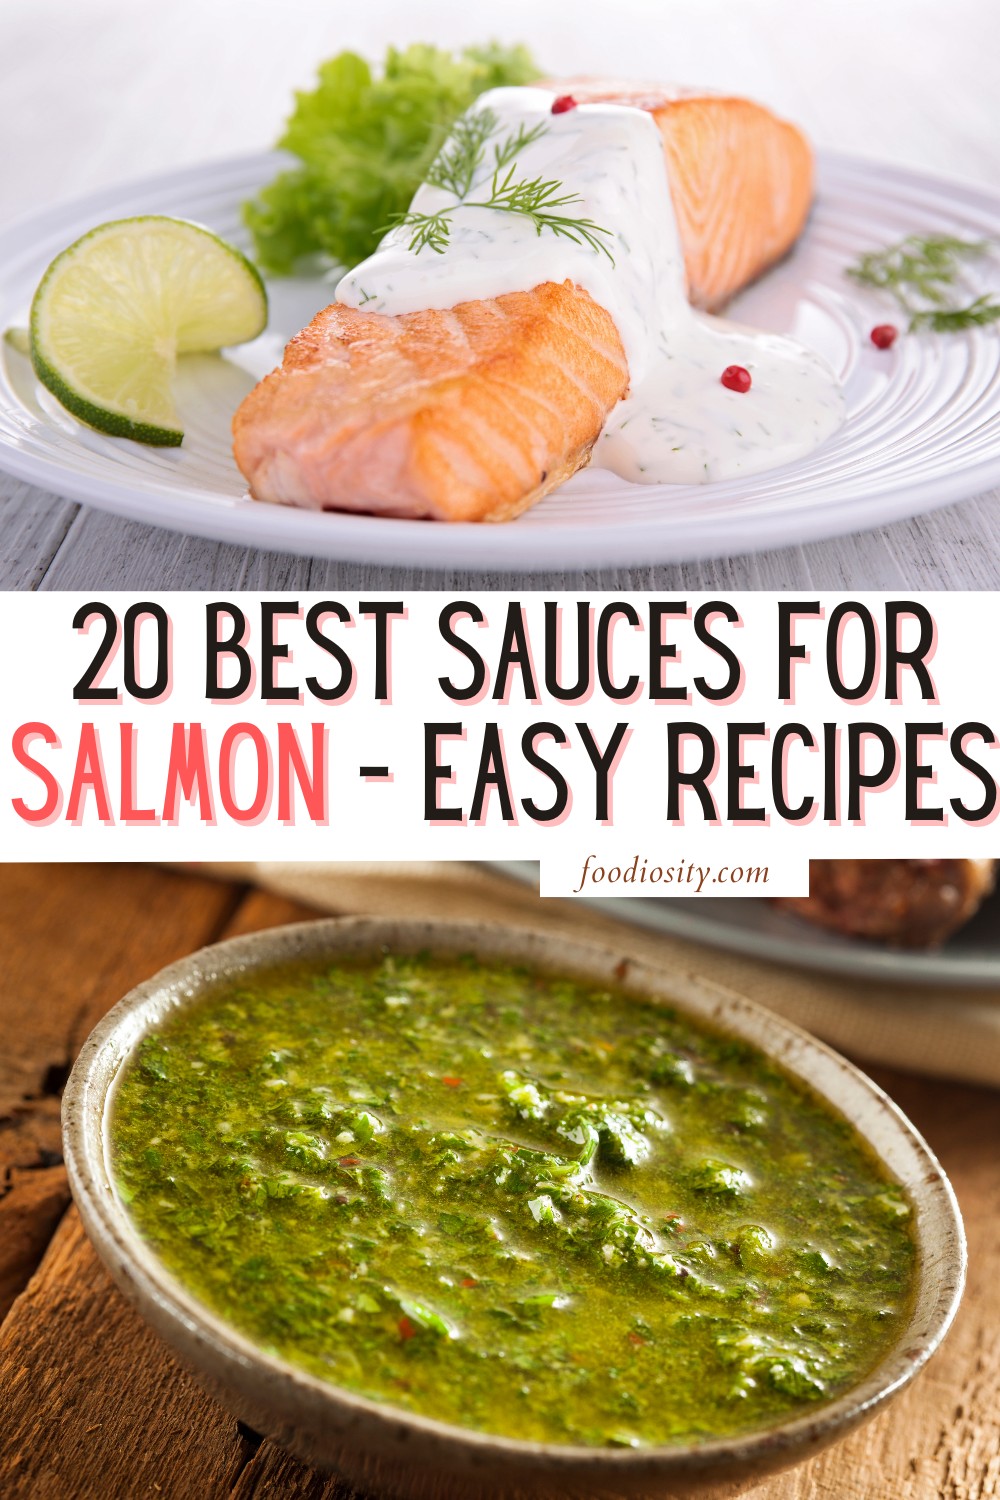 20 best Sauces for salmon - easy Recipes 1